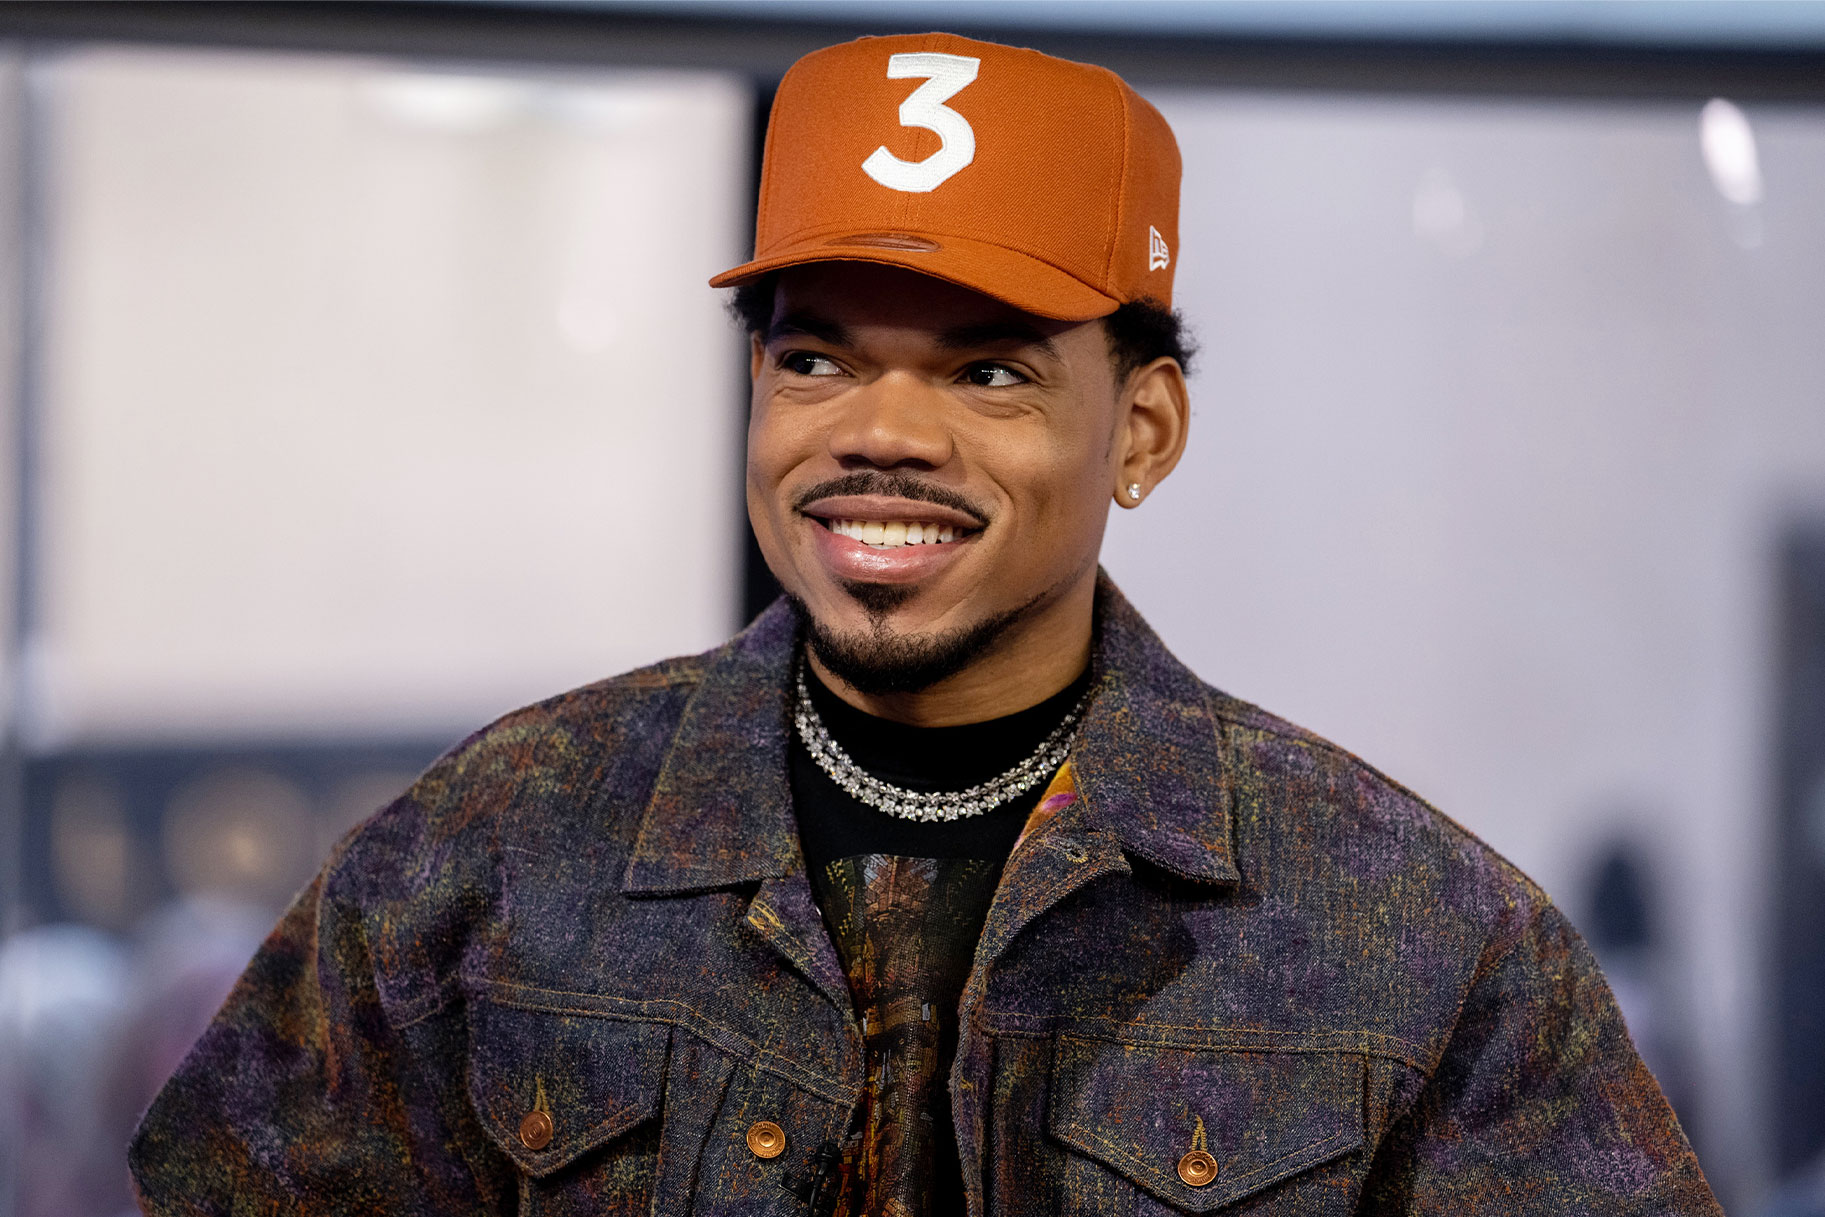 Chance the Rapper Country Cover of Nelly's “Hot in Herre”